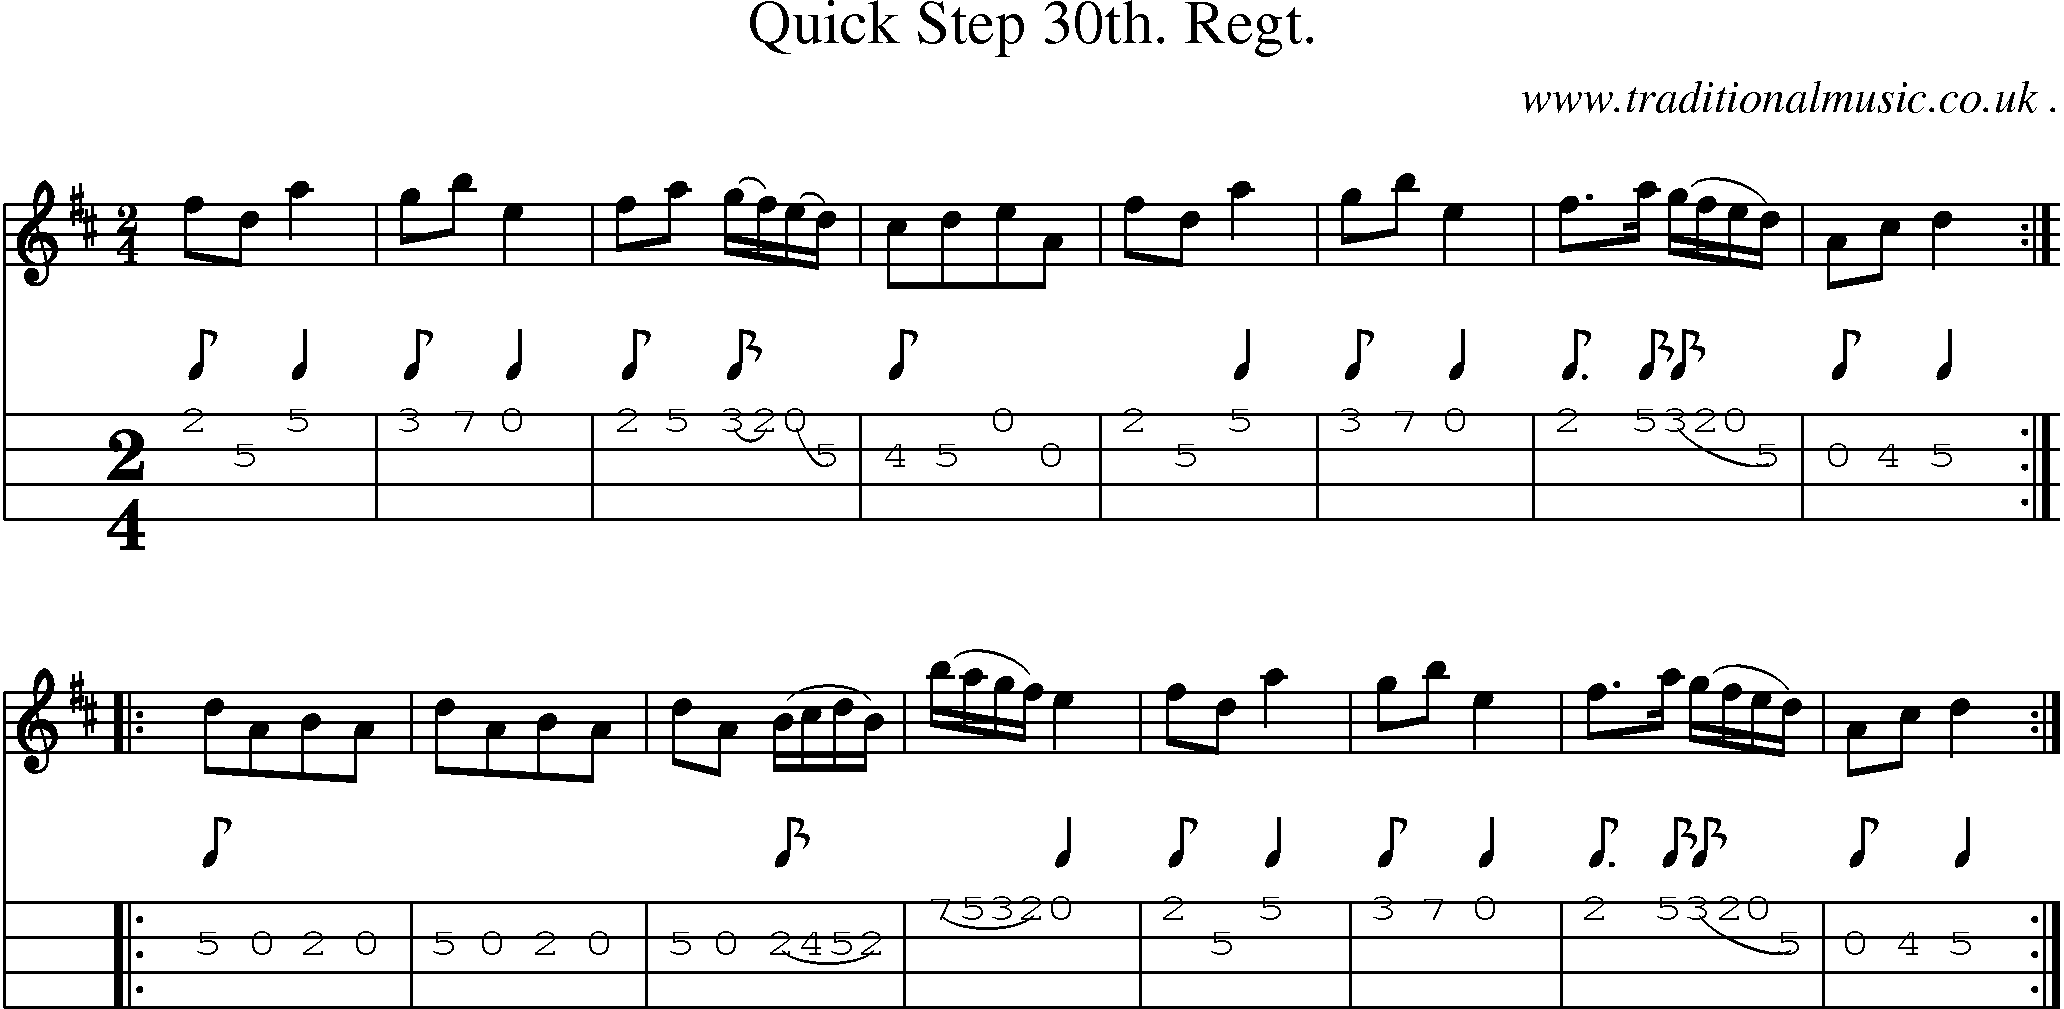 Sheet-Music and Mandolin Tabs for Quick Step 30th Regt